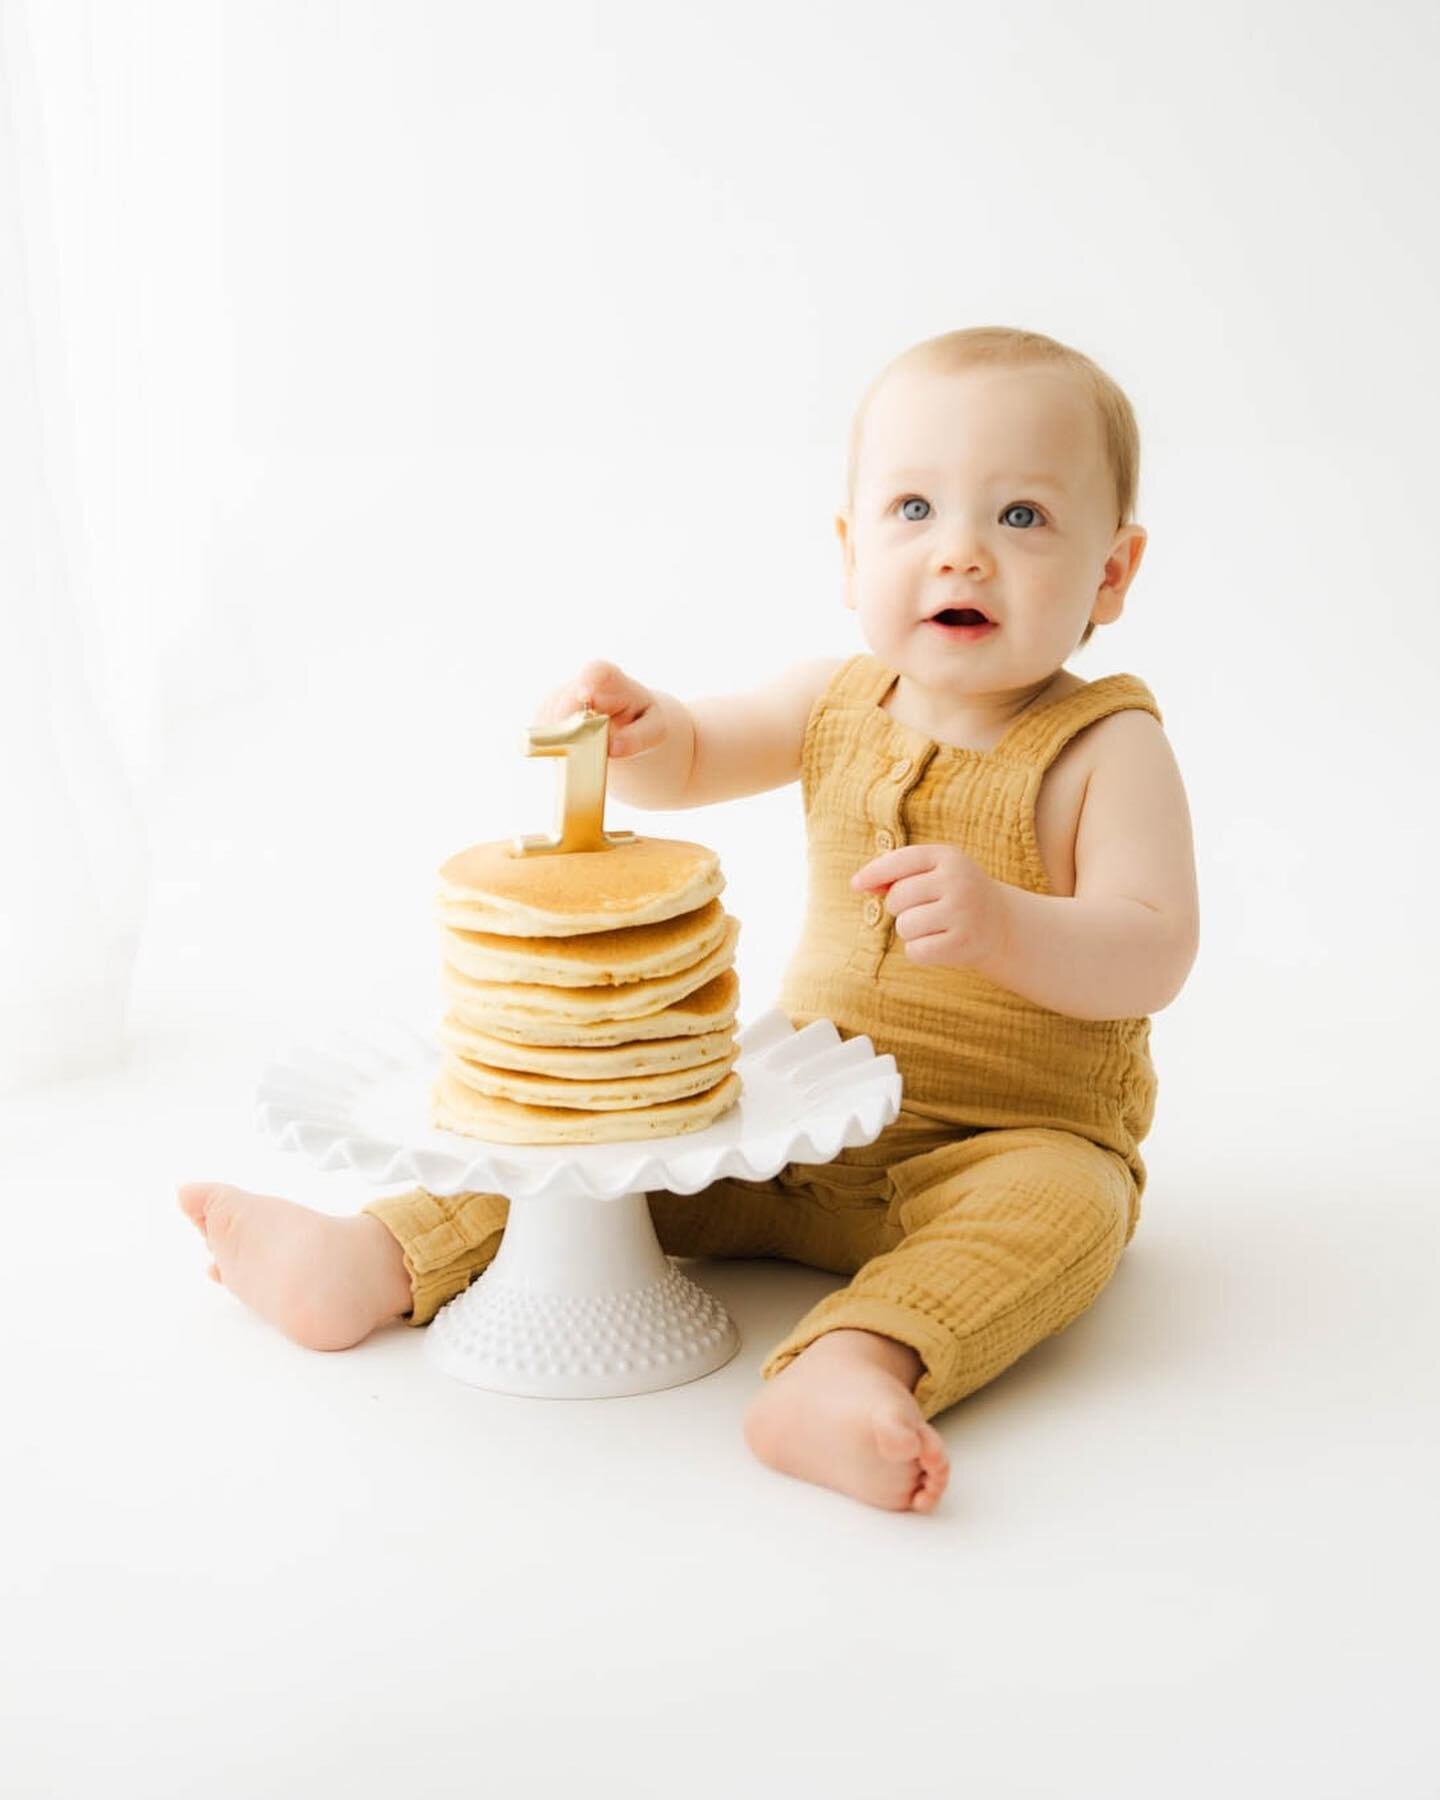 This little guy's first birthday photoshoot was a delicious celebration of love and pancakes! From his infectious smiles to the warmth radiating from his two incredible moms, every moment was a testament to the beauty of family and togetherness. It w